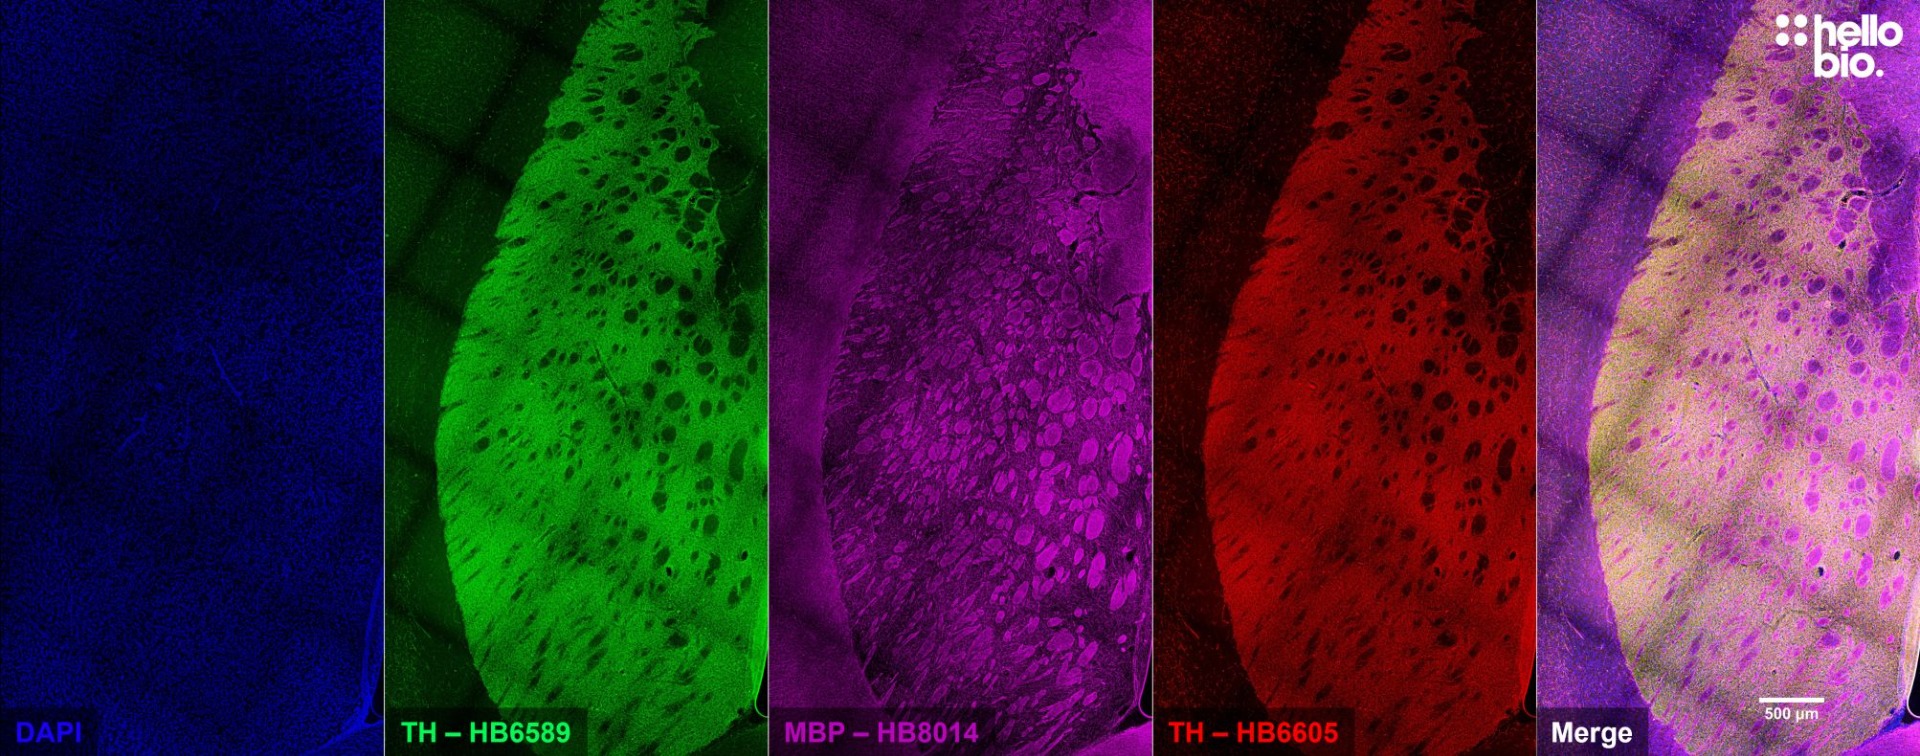 Figure 3. Independent antibody validation of HB6589 and HB6605 in rat CPu.